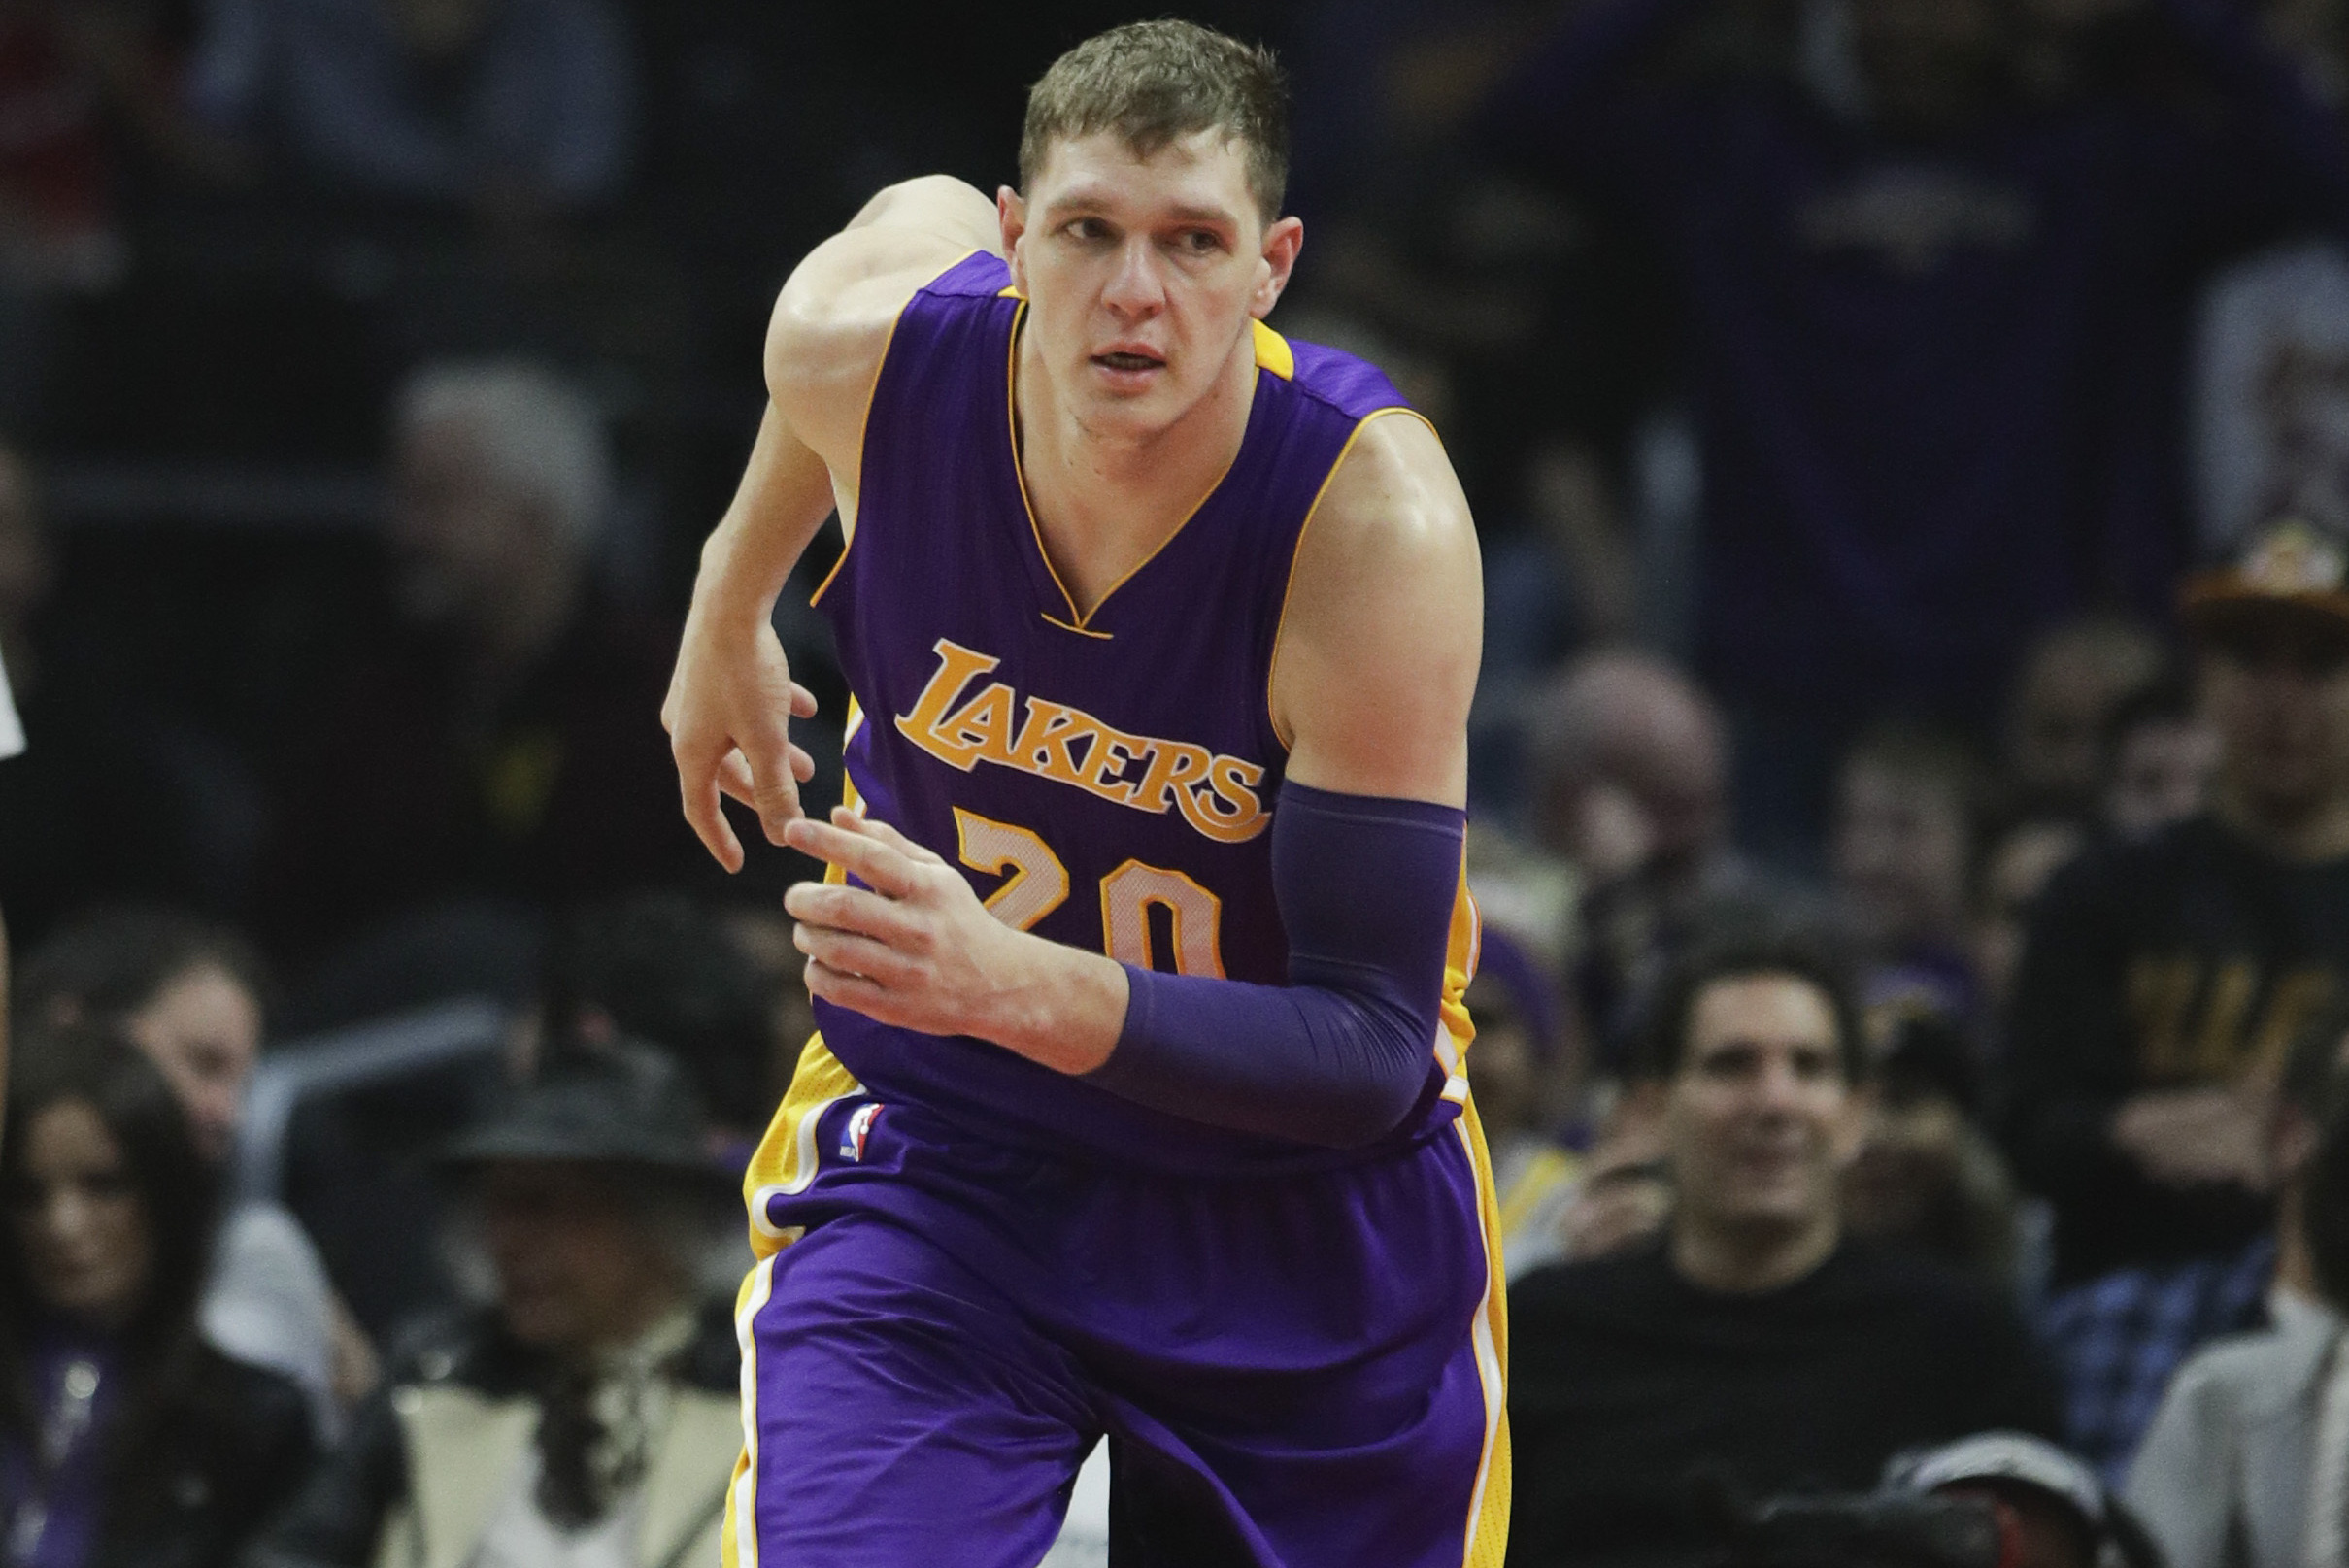 Timofey Mozgov comes back to League, Khimki clinch play-offs